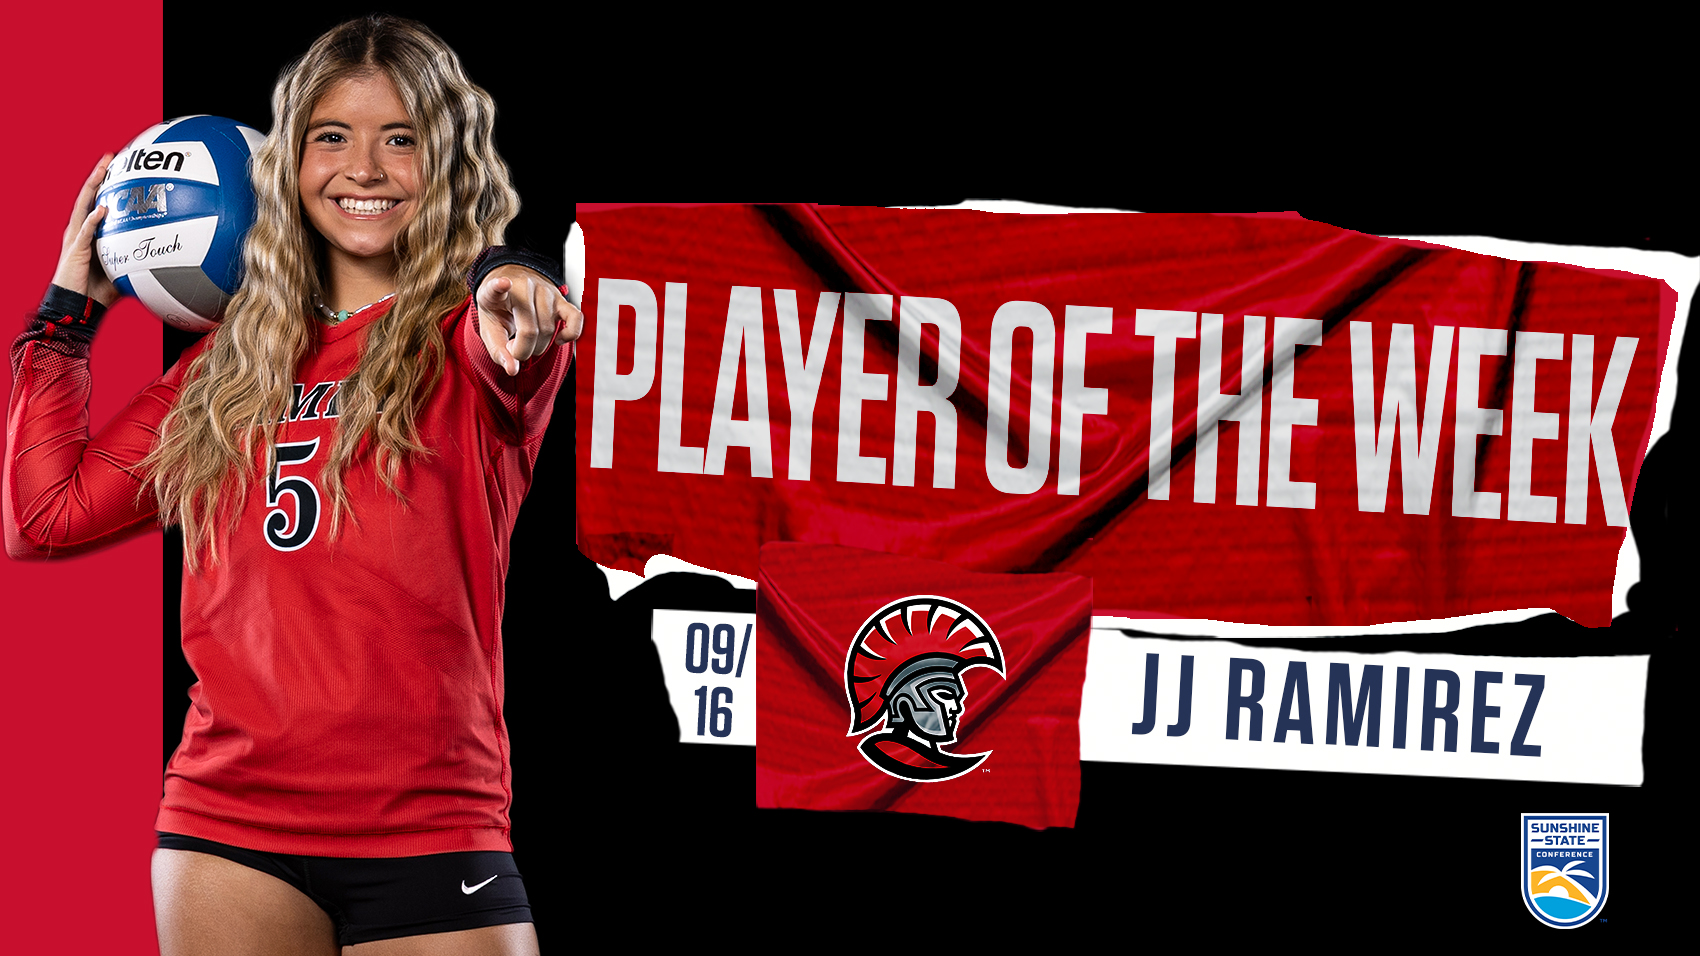 Ramirez earns SSC Player of the Week honors following her performances over the weekend